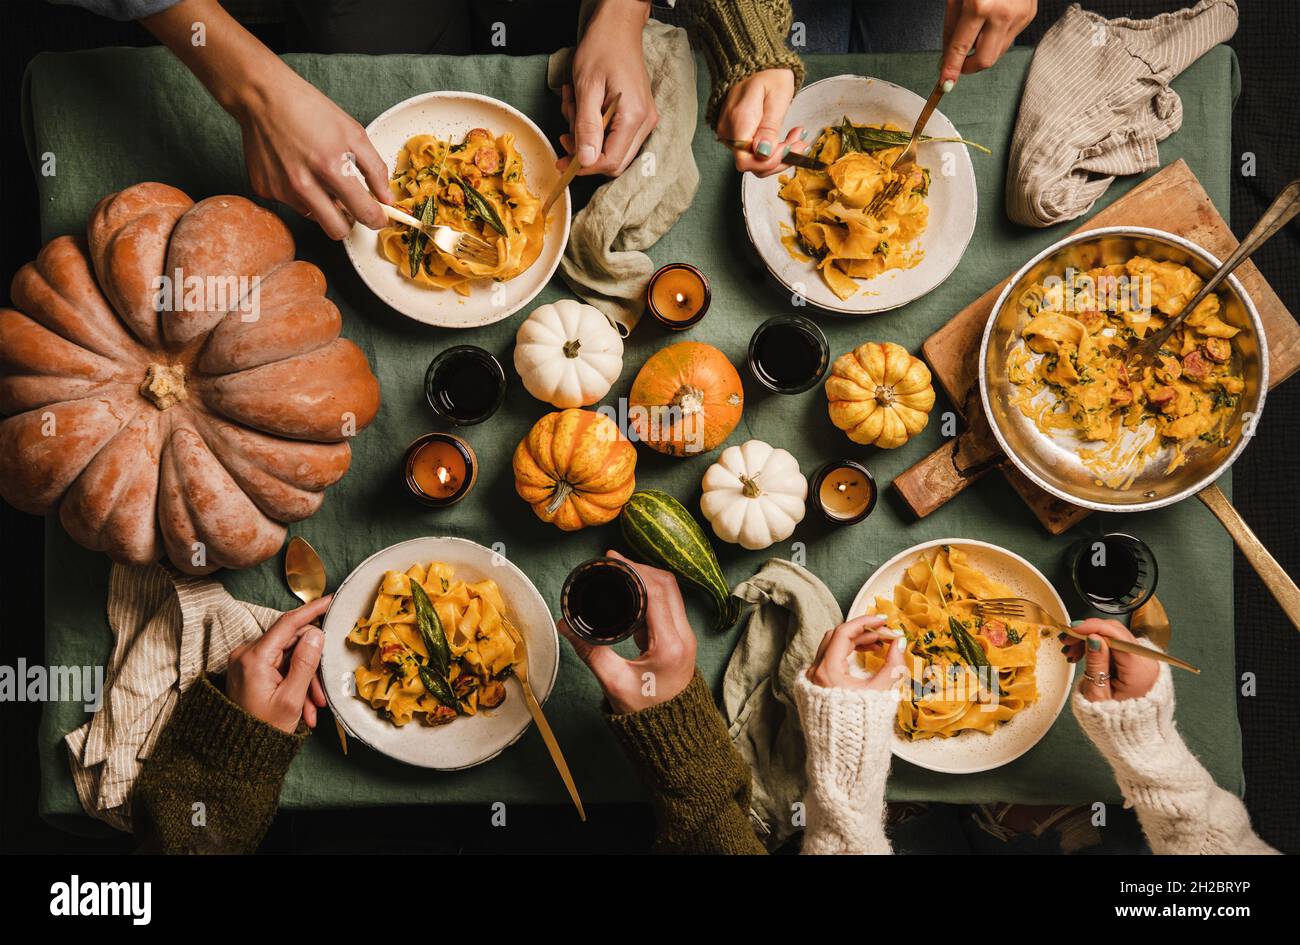 People eating squash pasta with sausage on Thanksgiving day Stock Photo